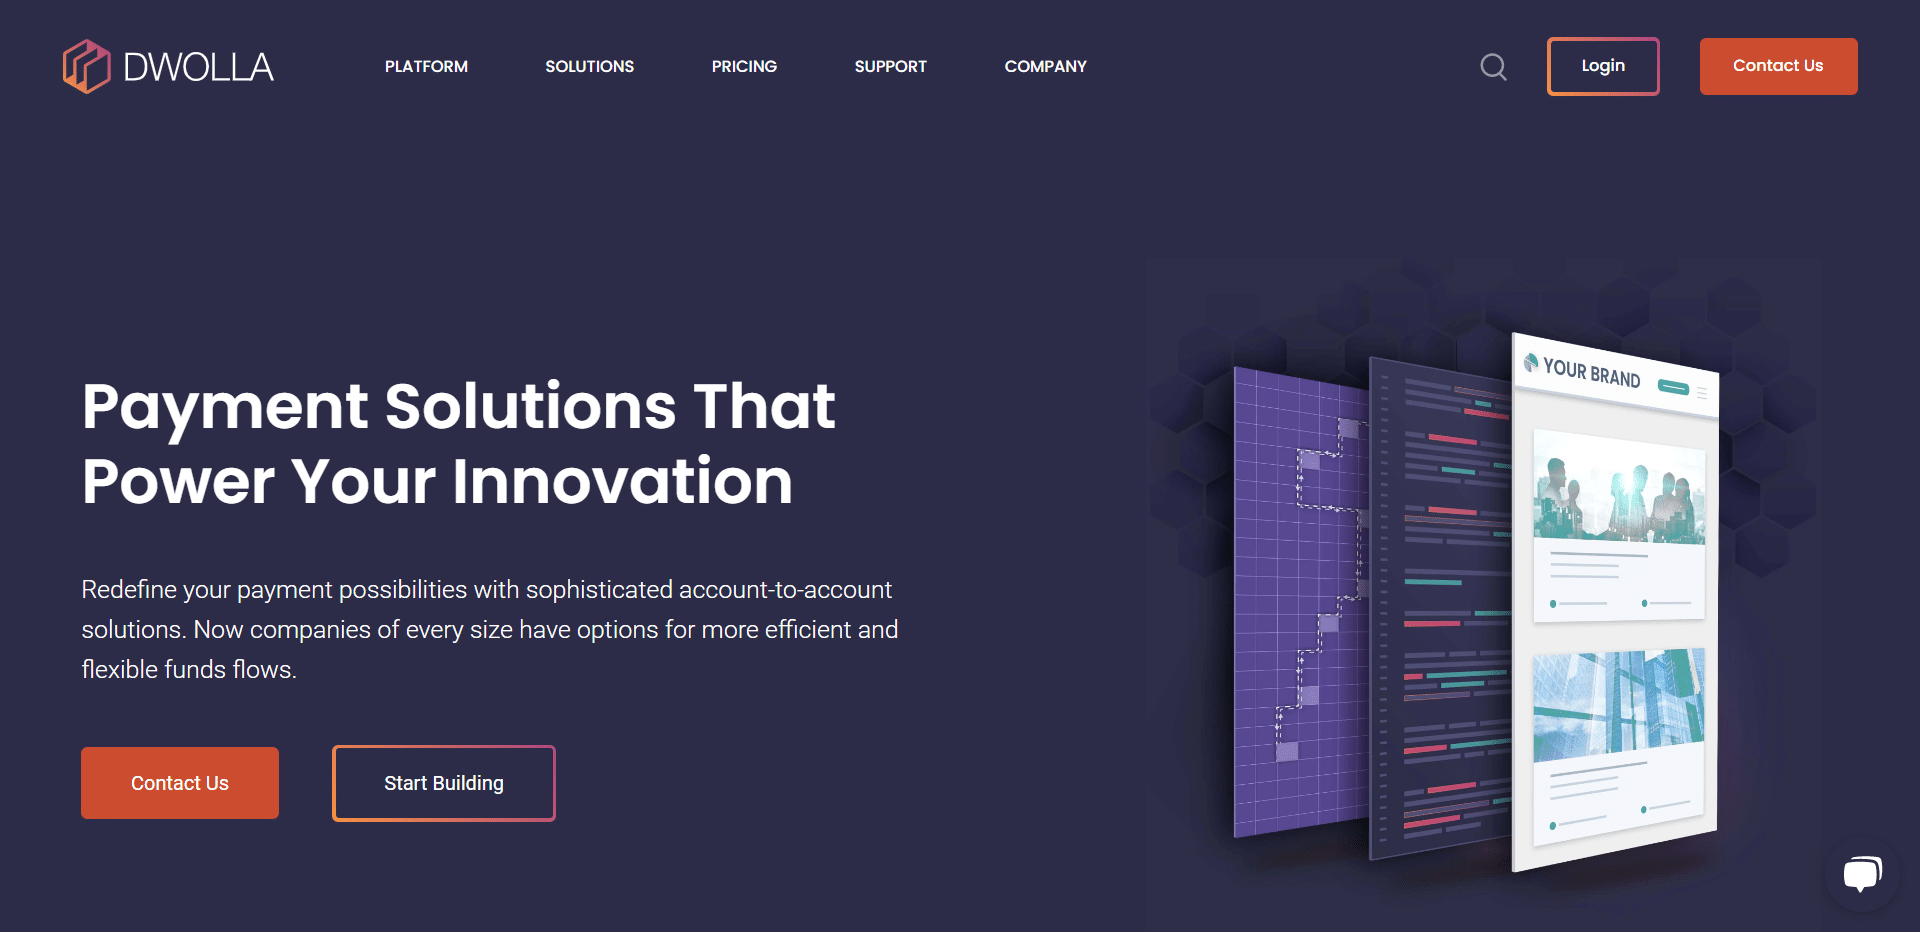 Landing page for Dwolla